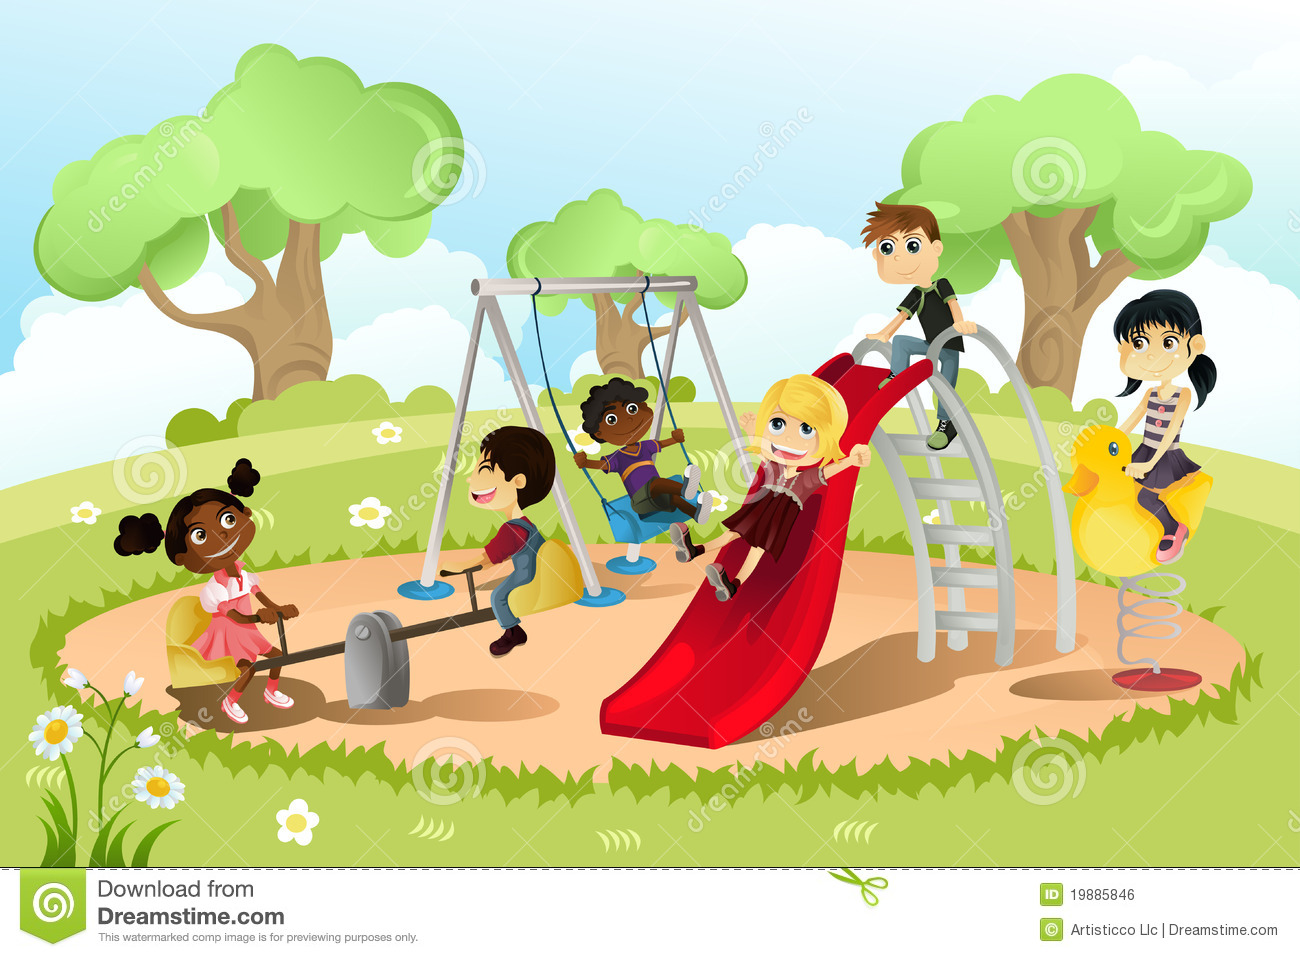 Children In Playground Royalty Free Stock Image   Image  19885846